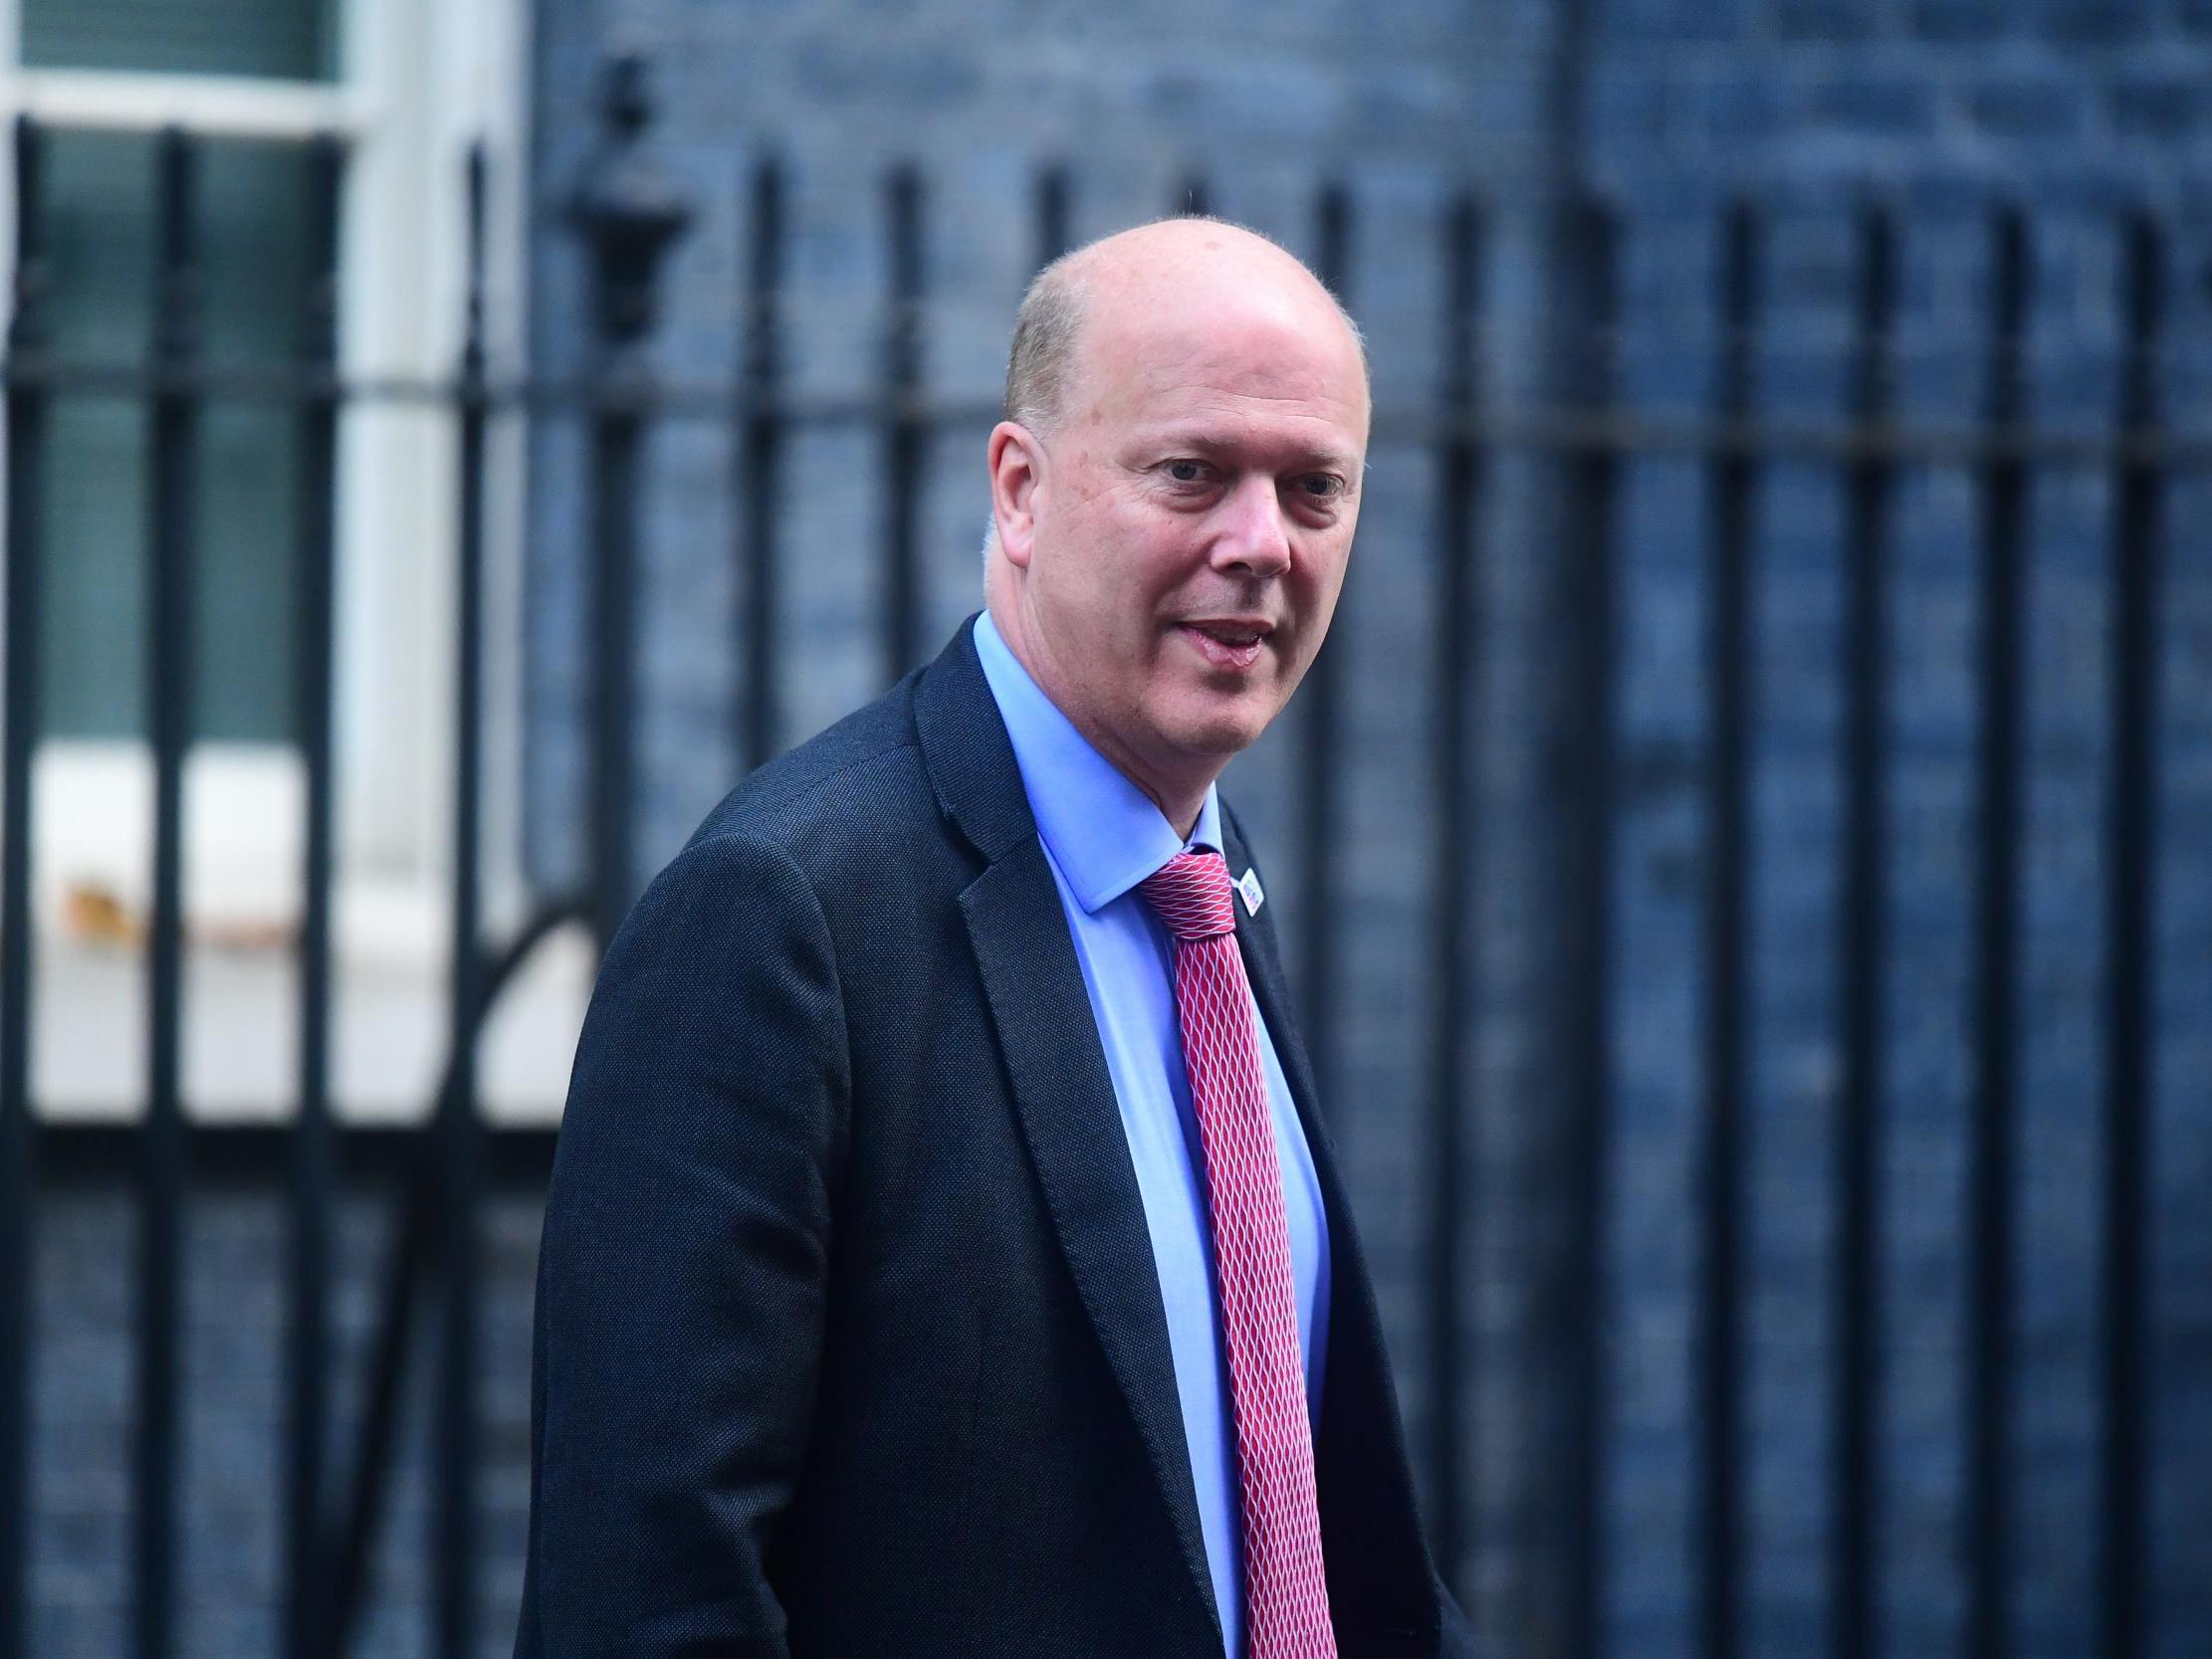 Chris Grayling ignored warnings about the consequences of part-privatising probation services as justice secretary